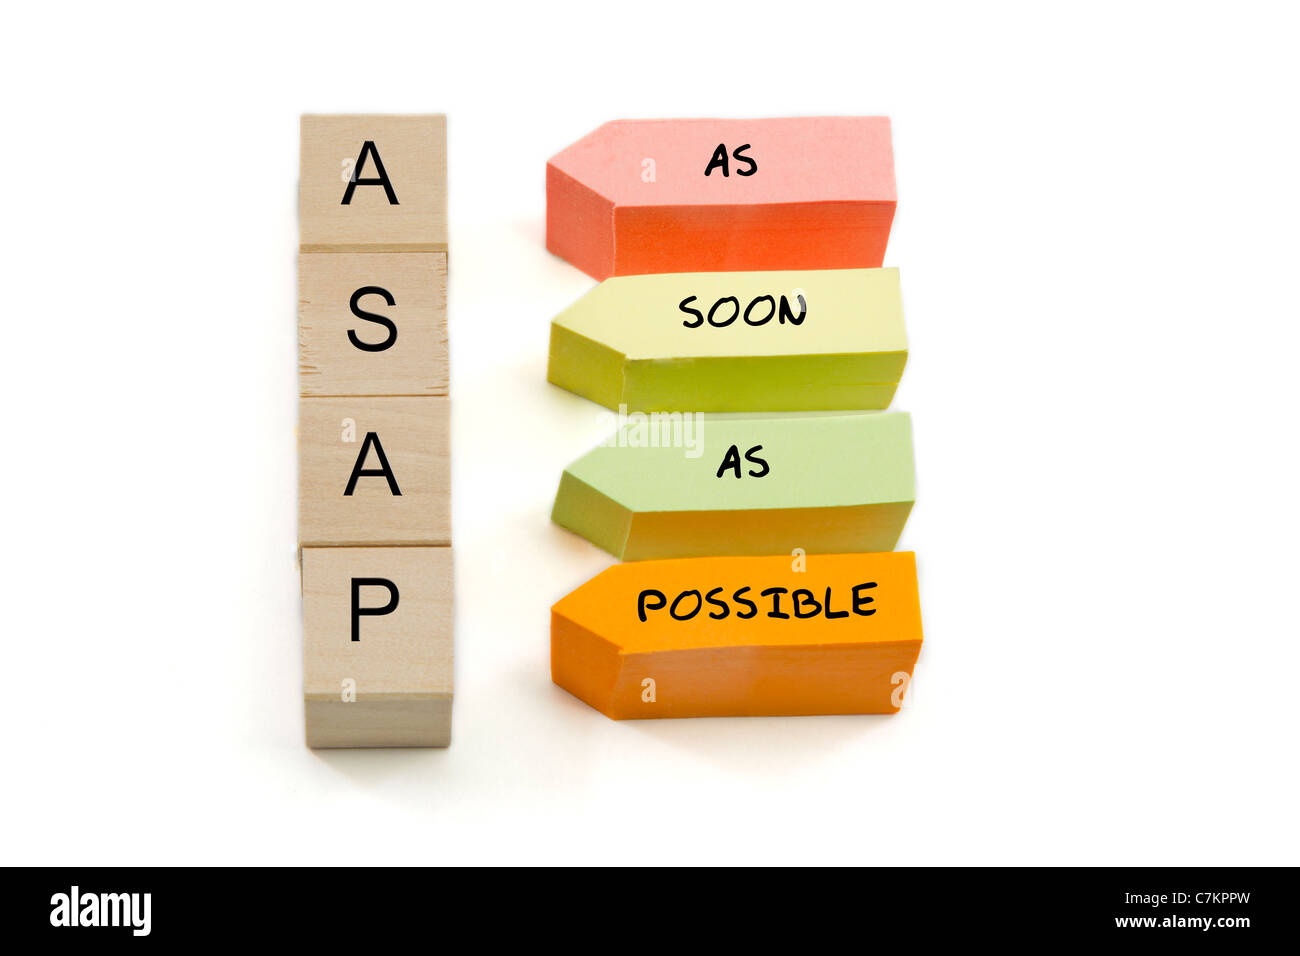 ASAP, As Soon As Possible spelled out on wooden blocks and colorful arrow shaped sticky notes. Stock Photo